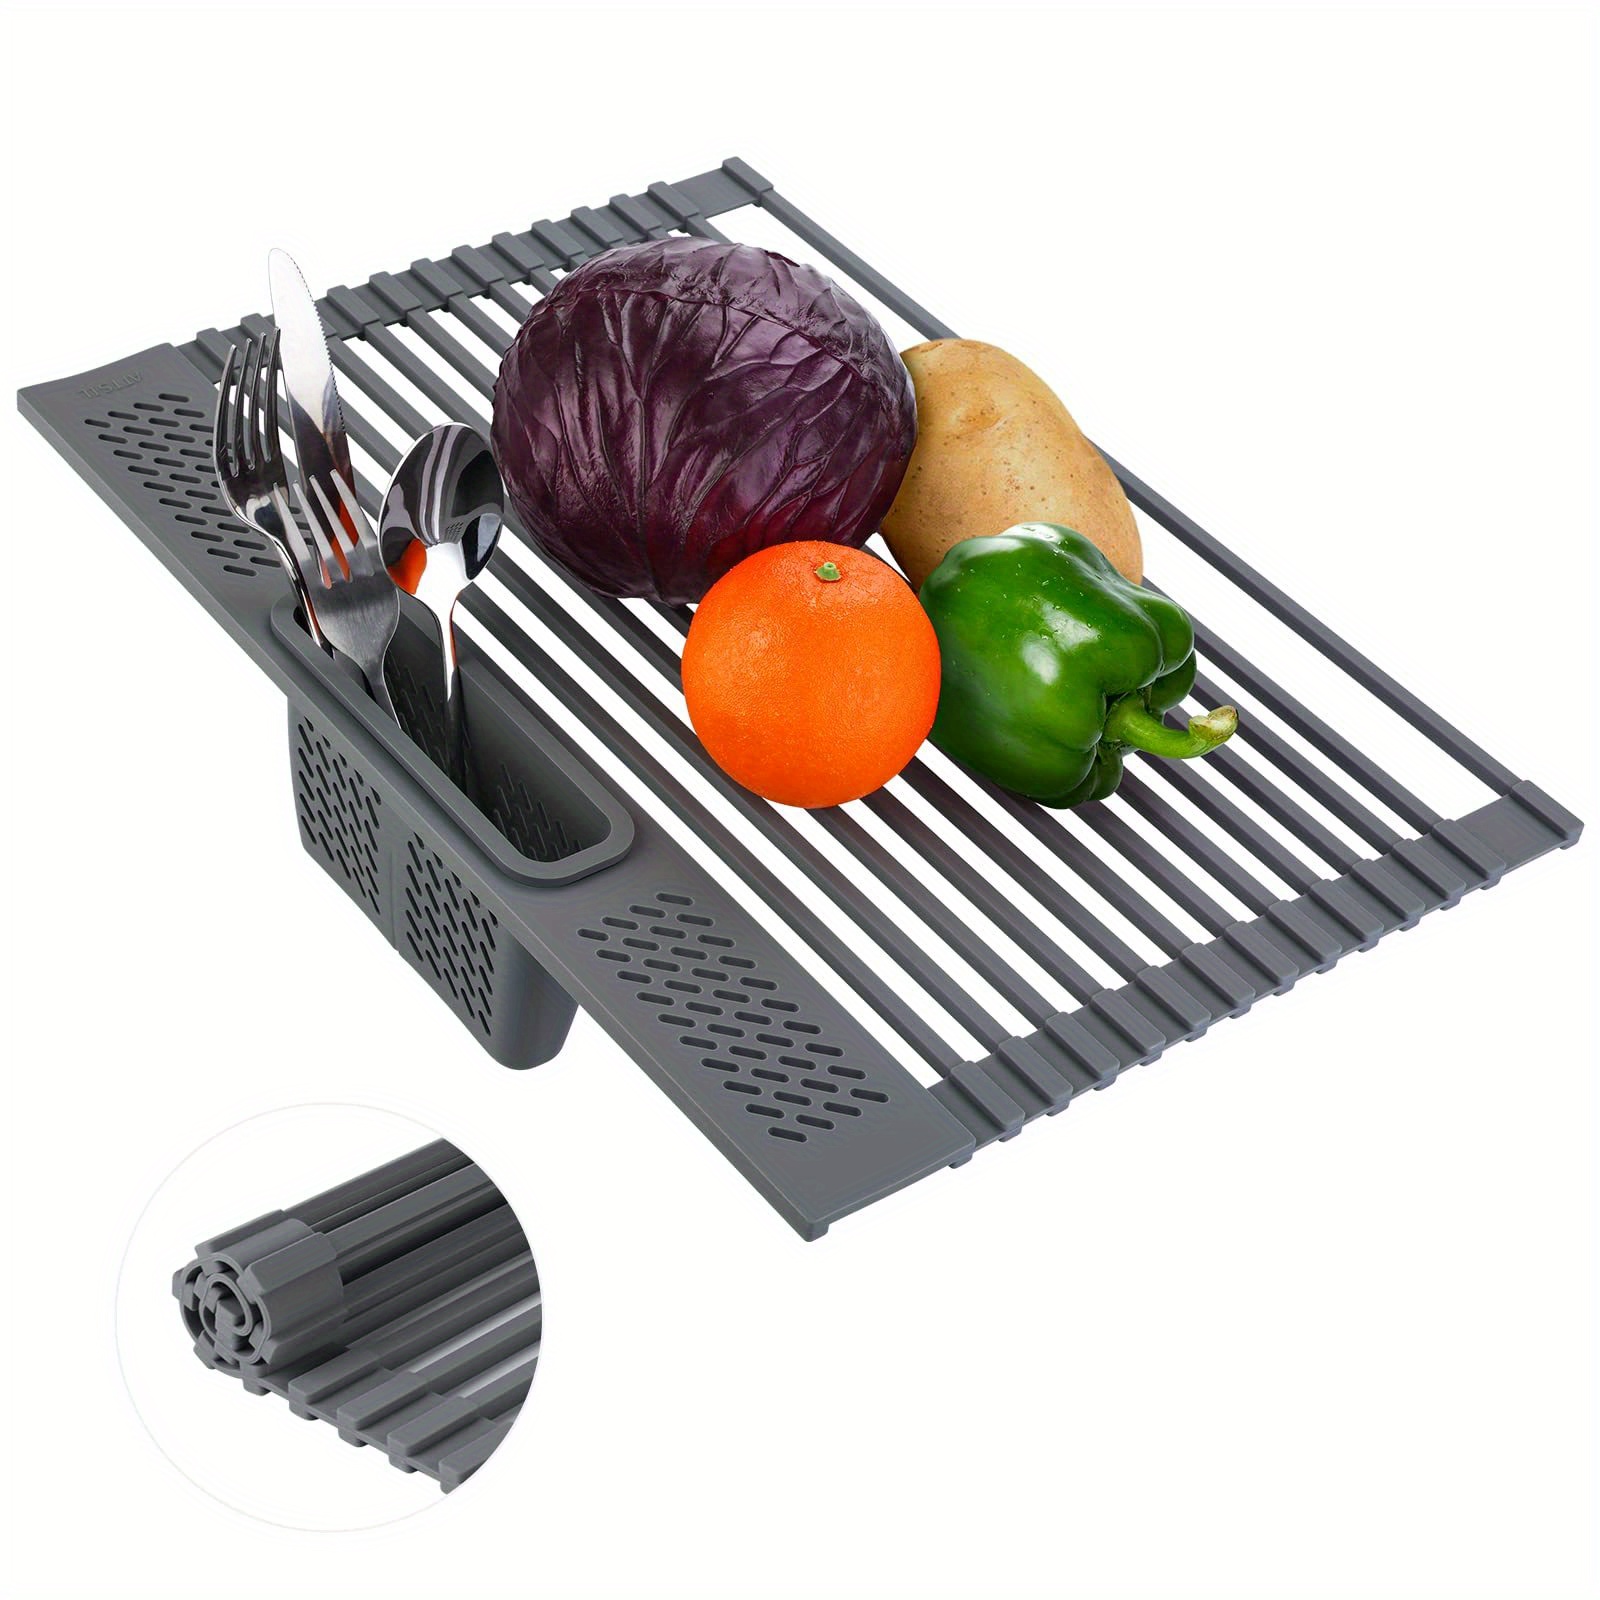 

Kitchen Roll-up Dish Drying Rack, Multifunctional Rollable Over Sink Dish Rack With Utensil Holder, Foldable Silicone Wrapped Steel Drain Rack For Kitchen Sink Counter, 16.85"(l) X 12"(w)